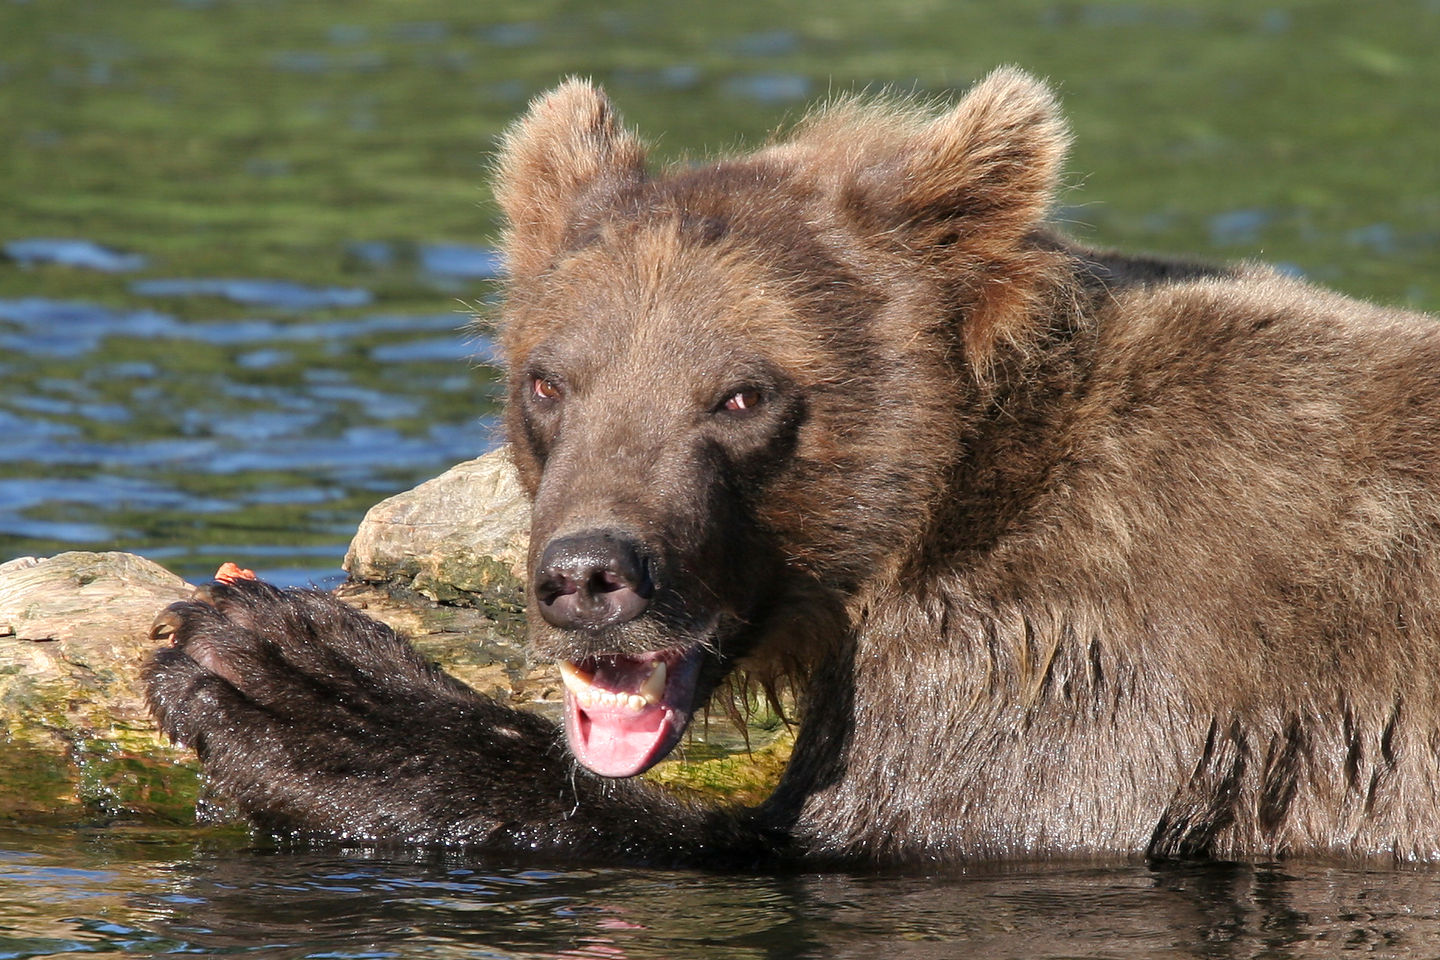 Playful grizzly